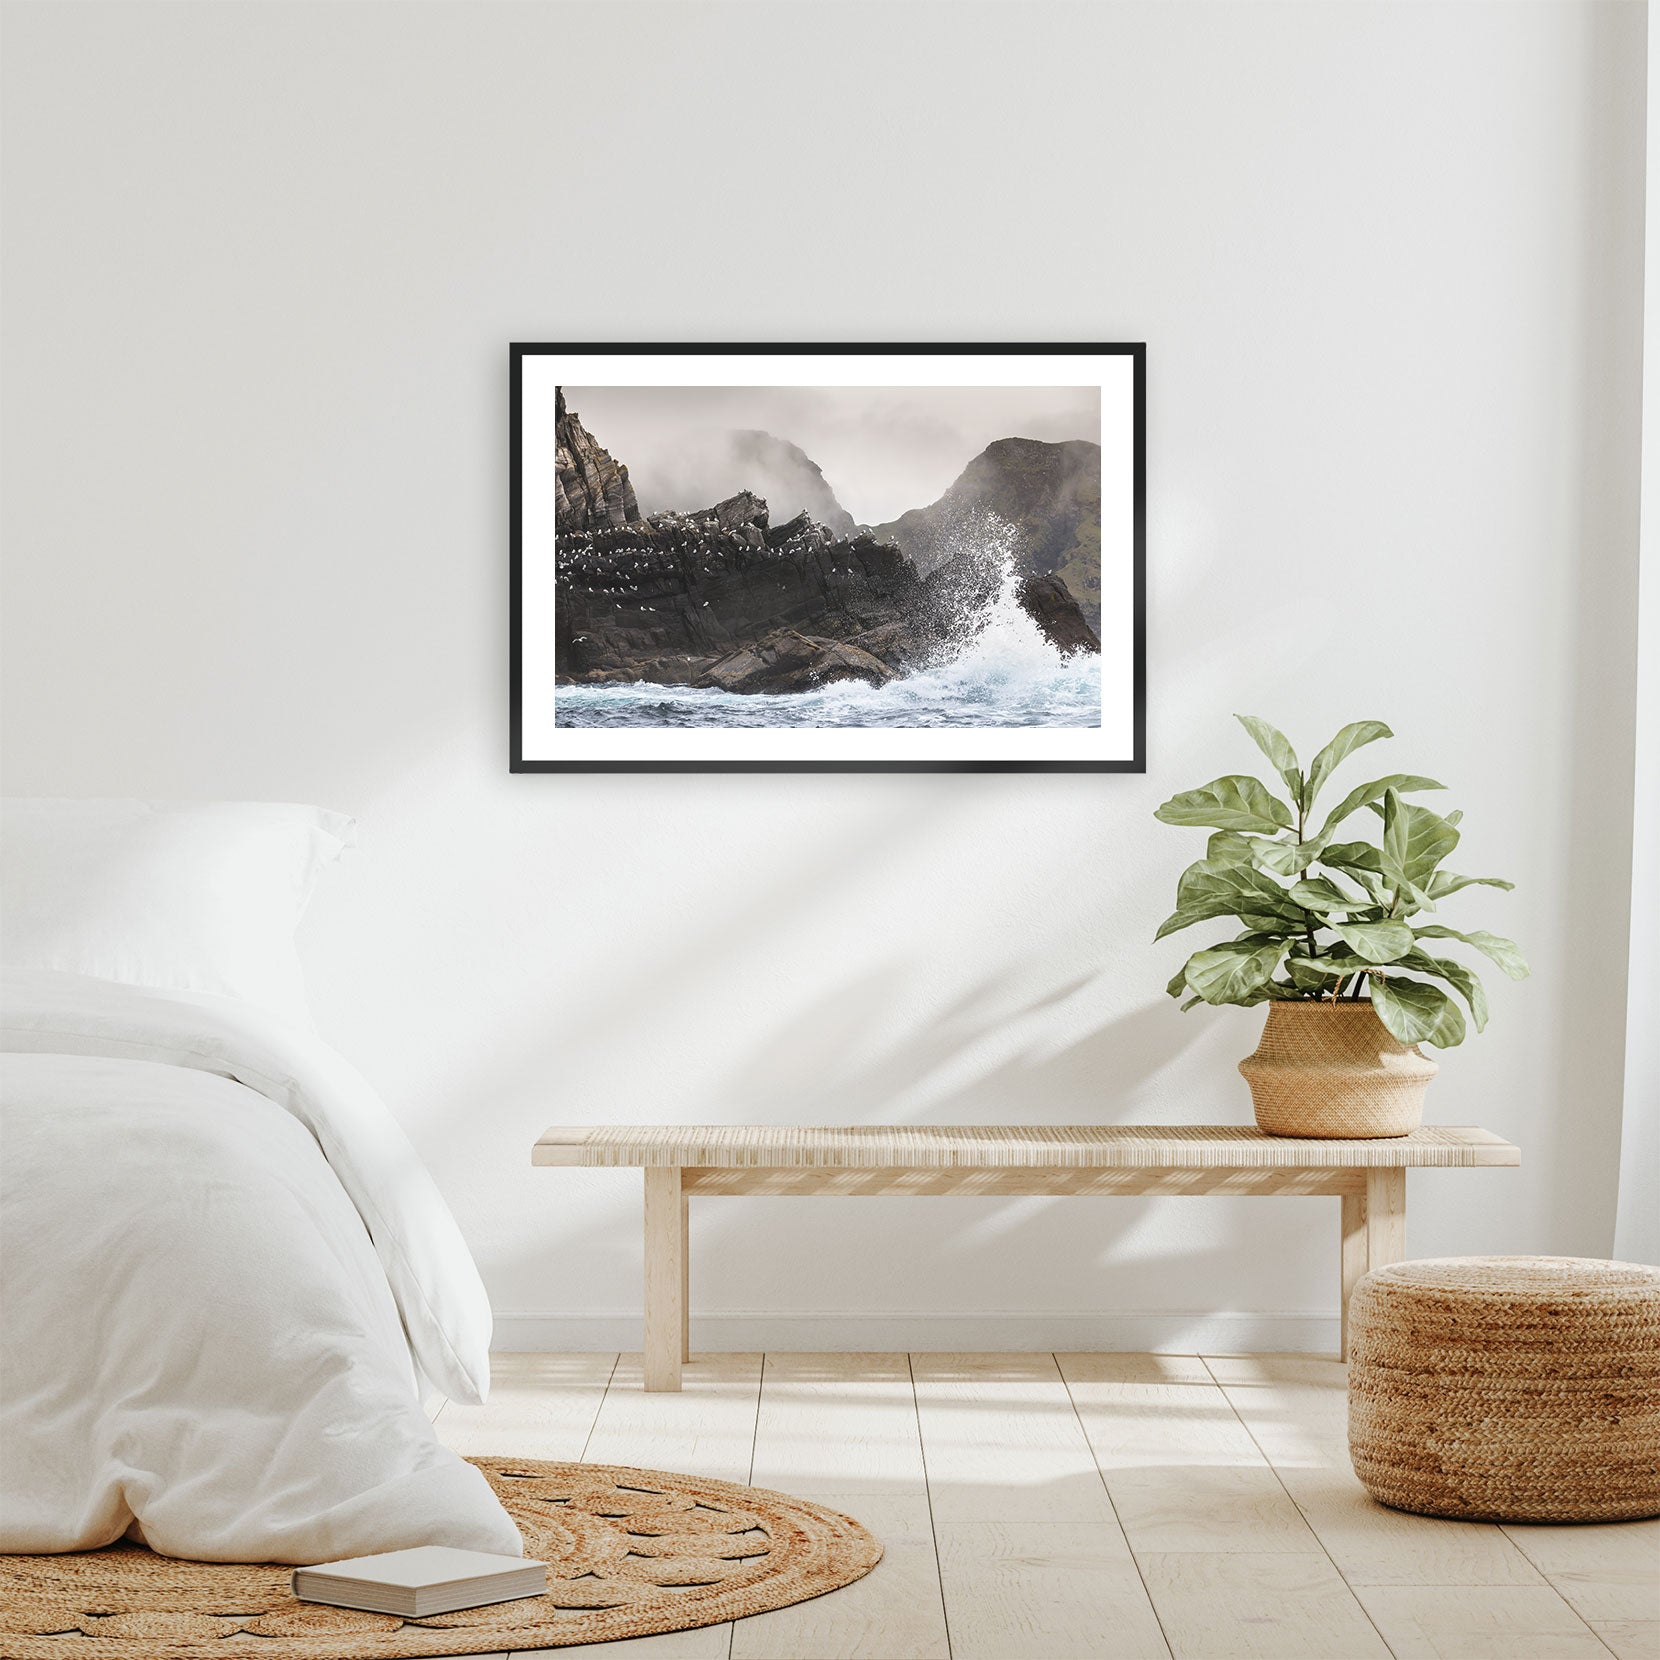 A framed print of a rough and rugged coast in Norway